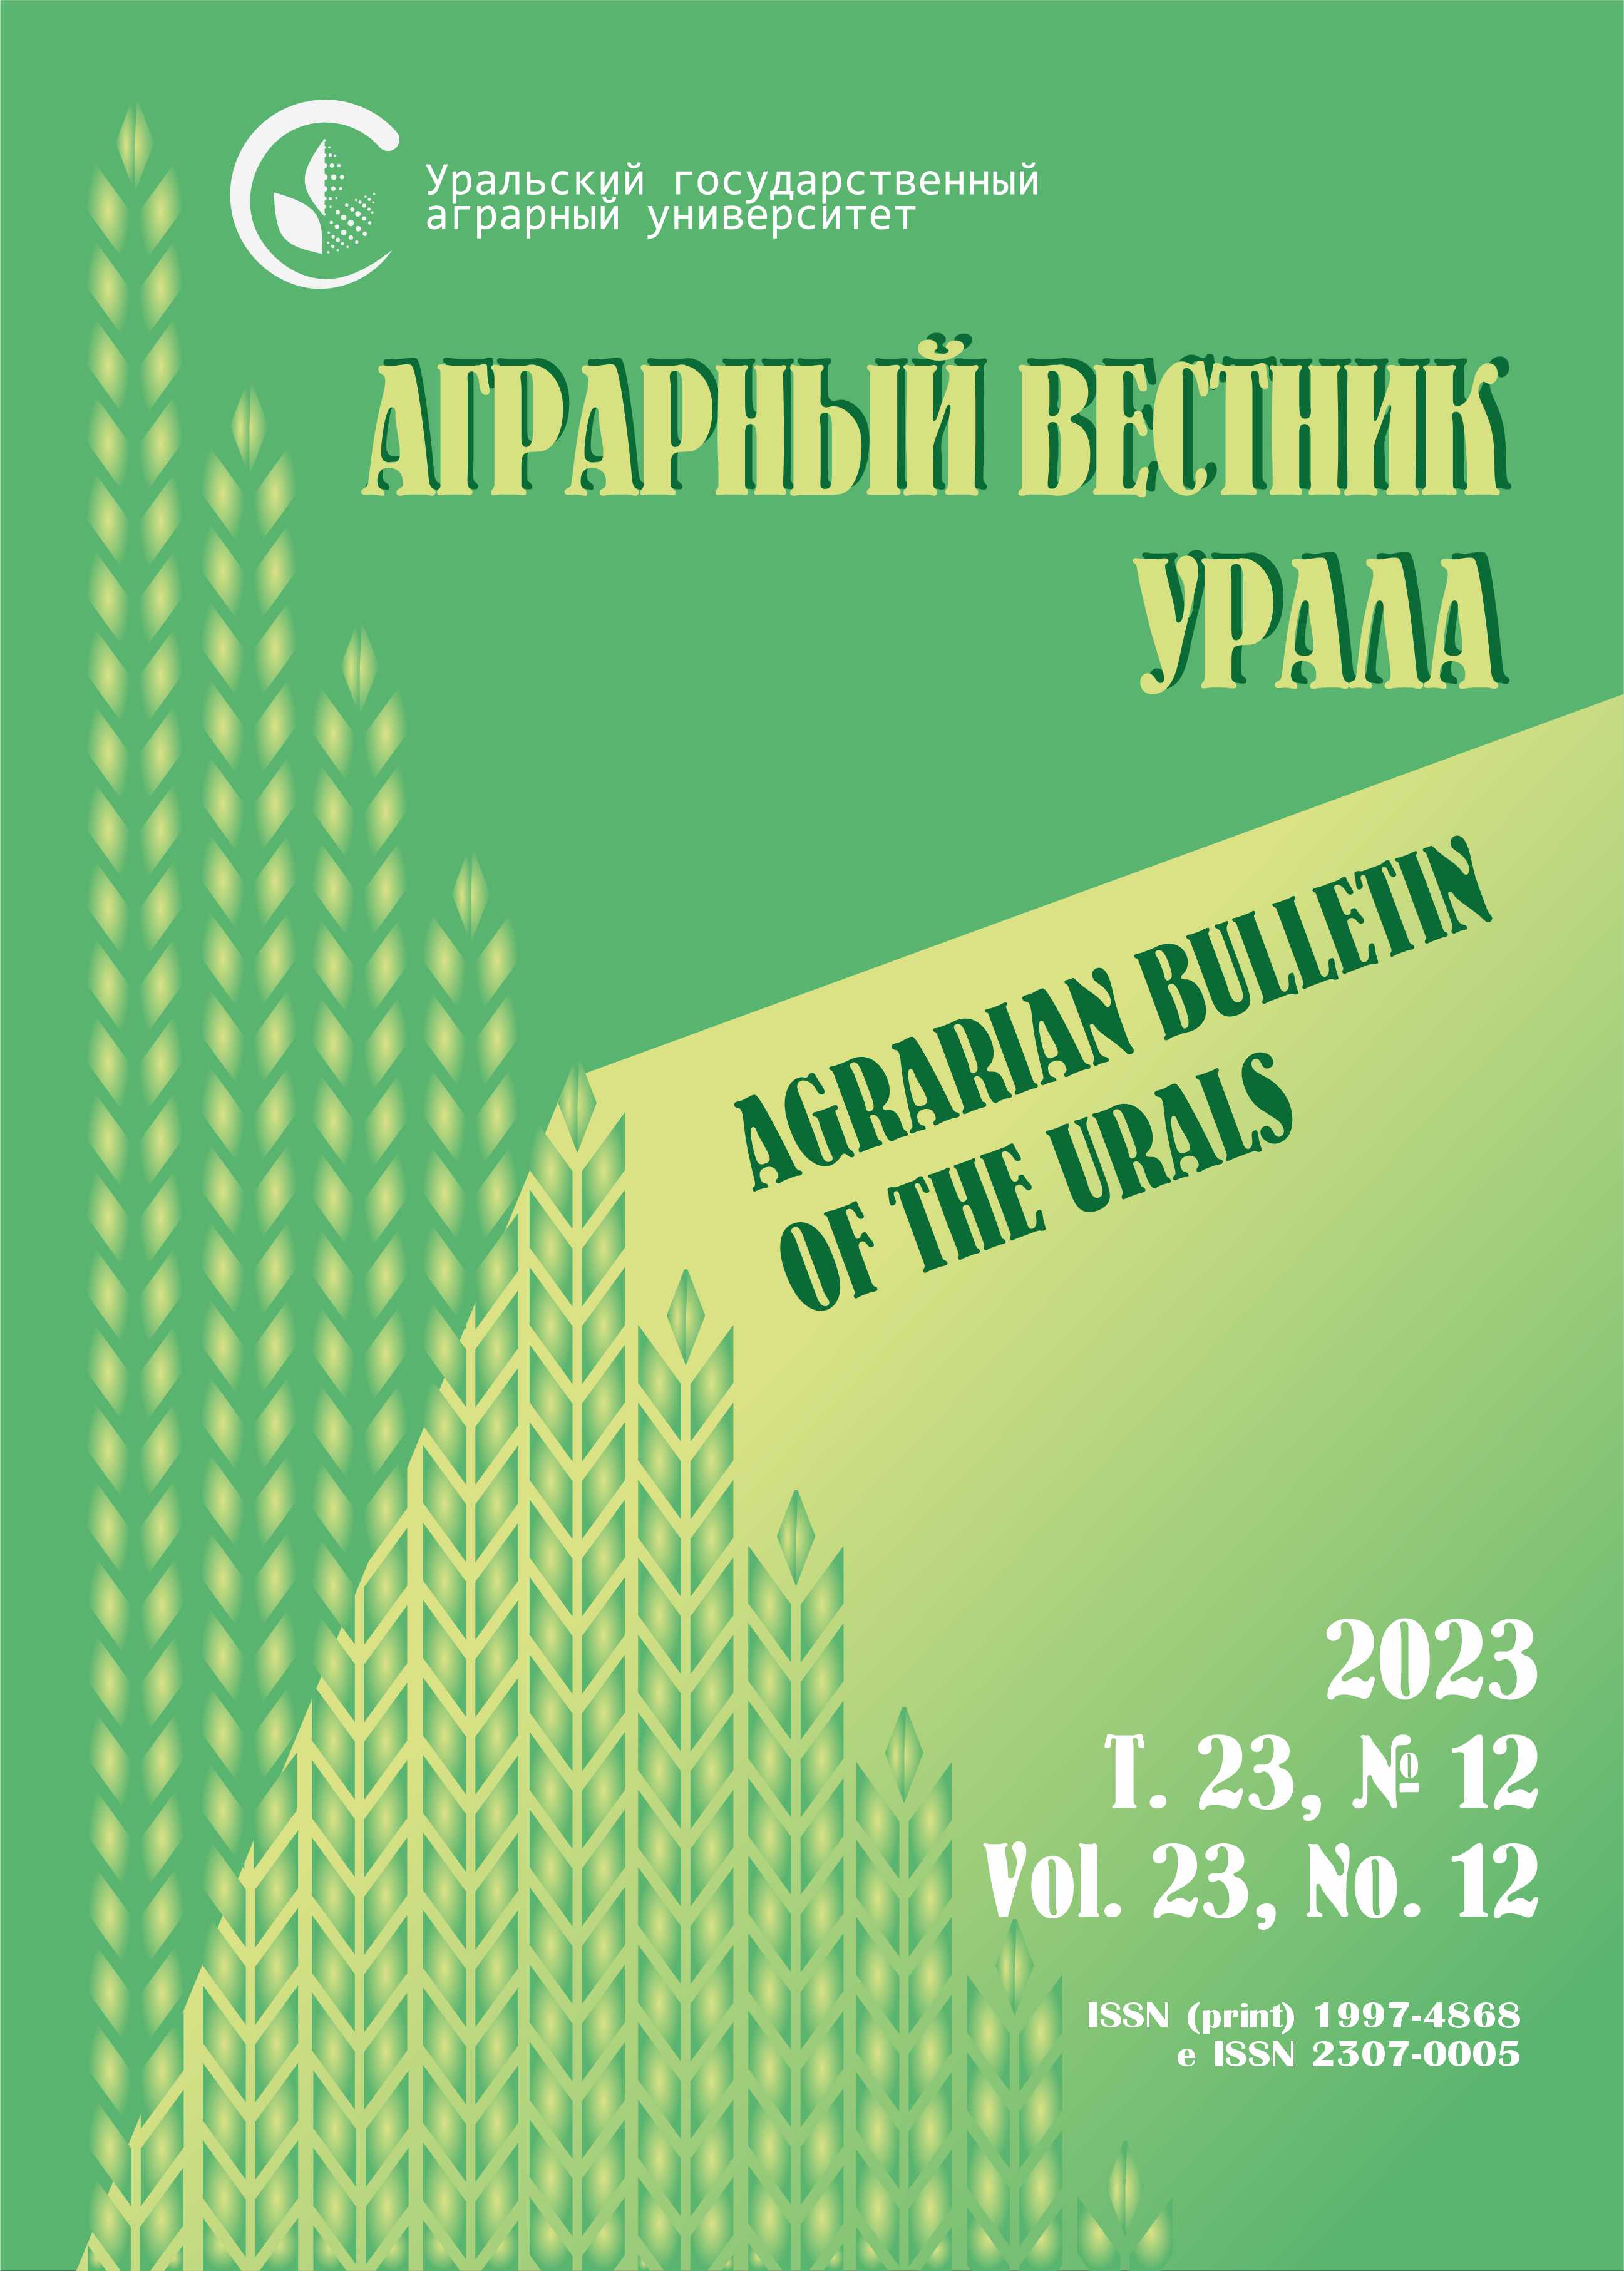                         Agrarian Bulletin of the
            